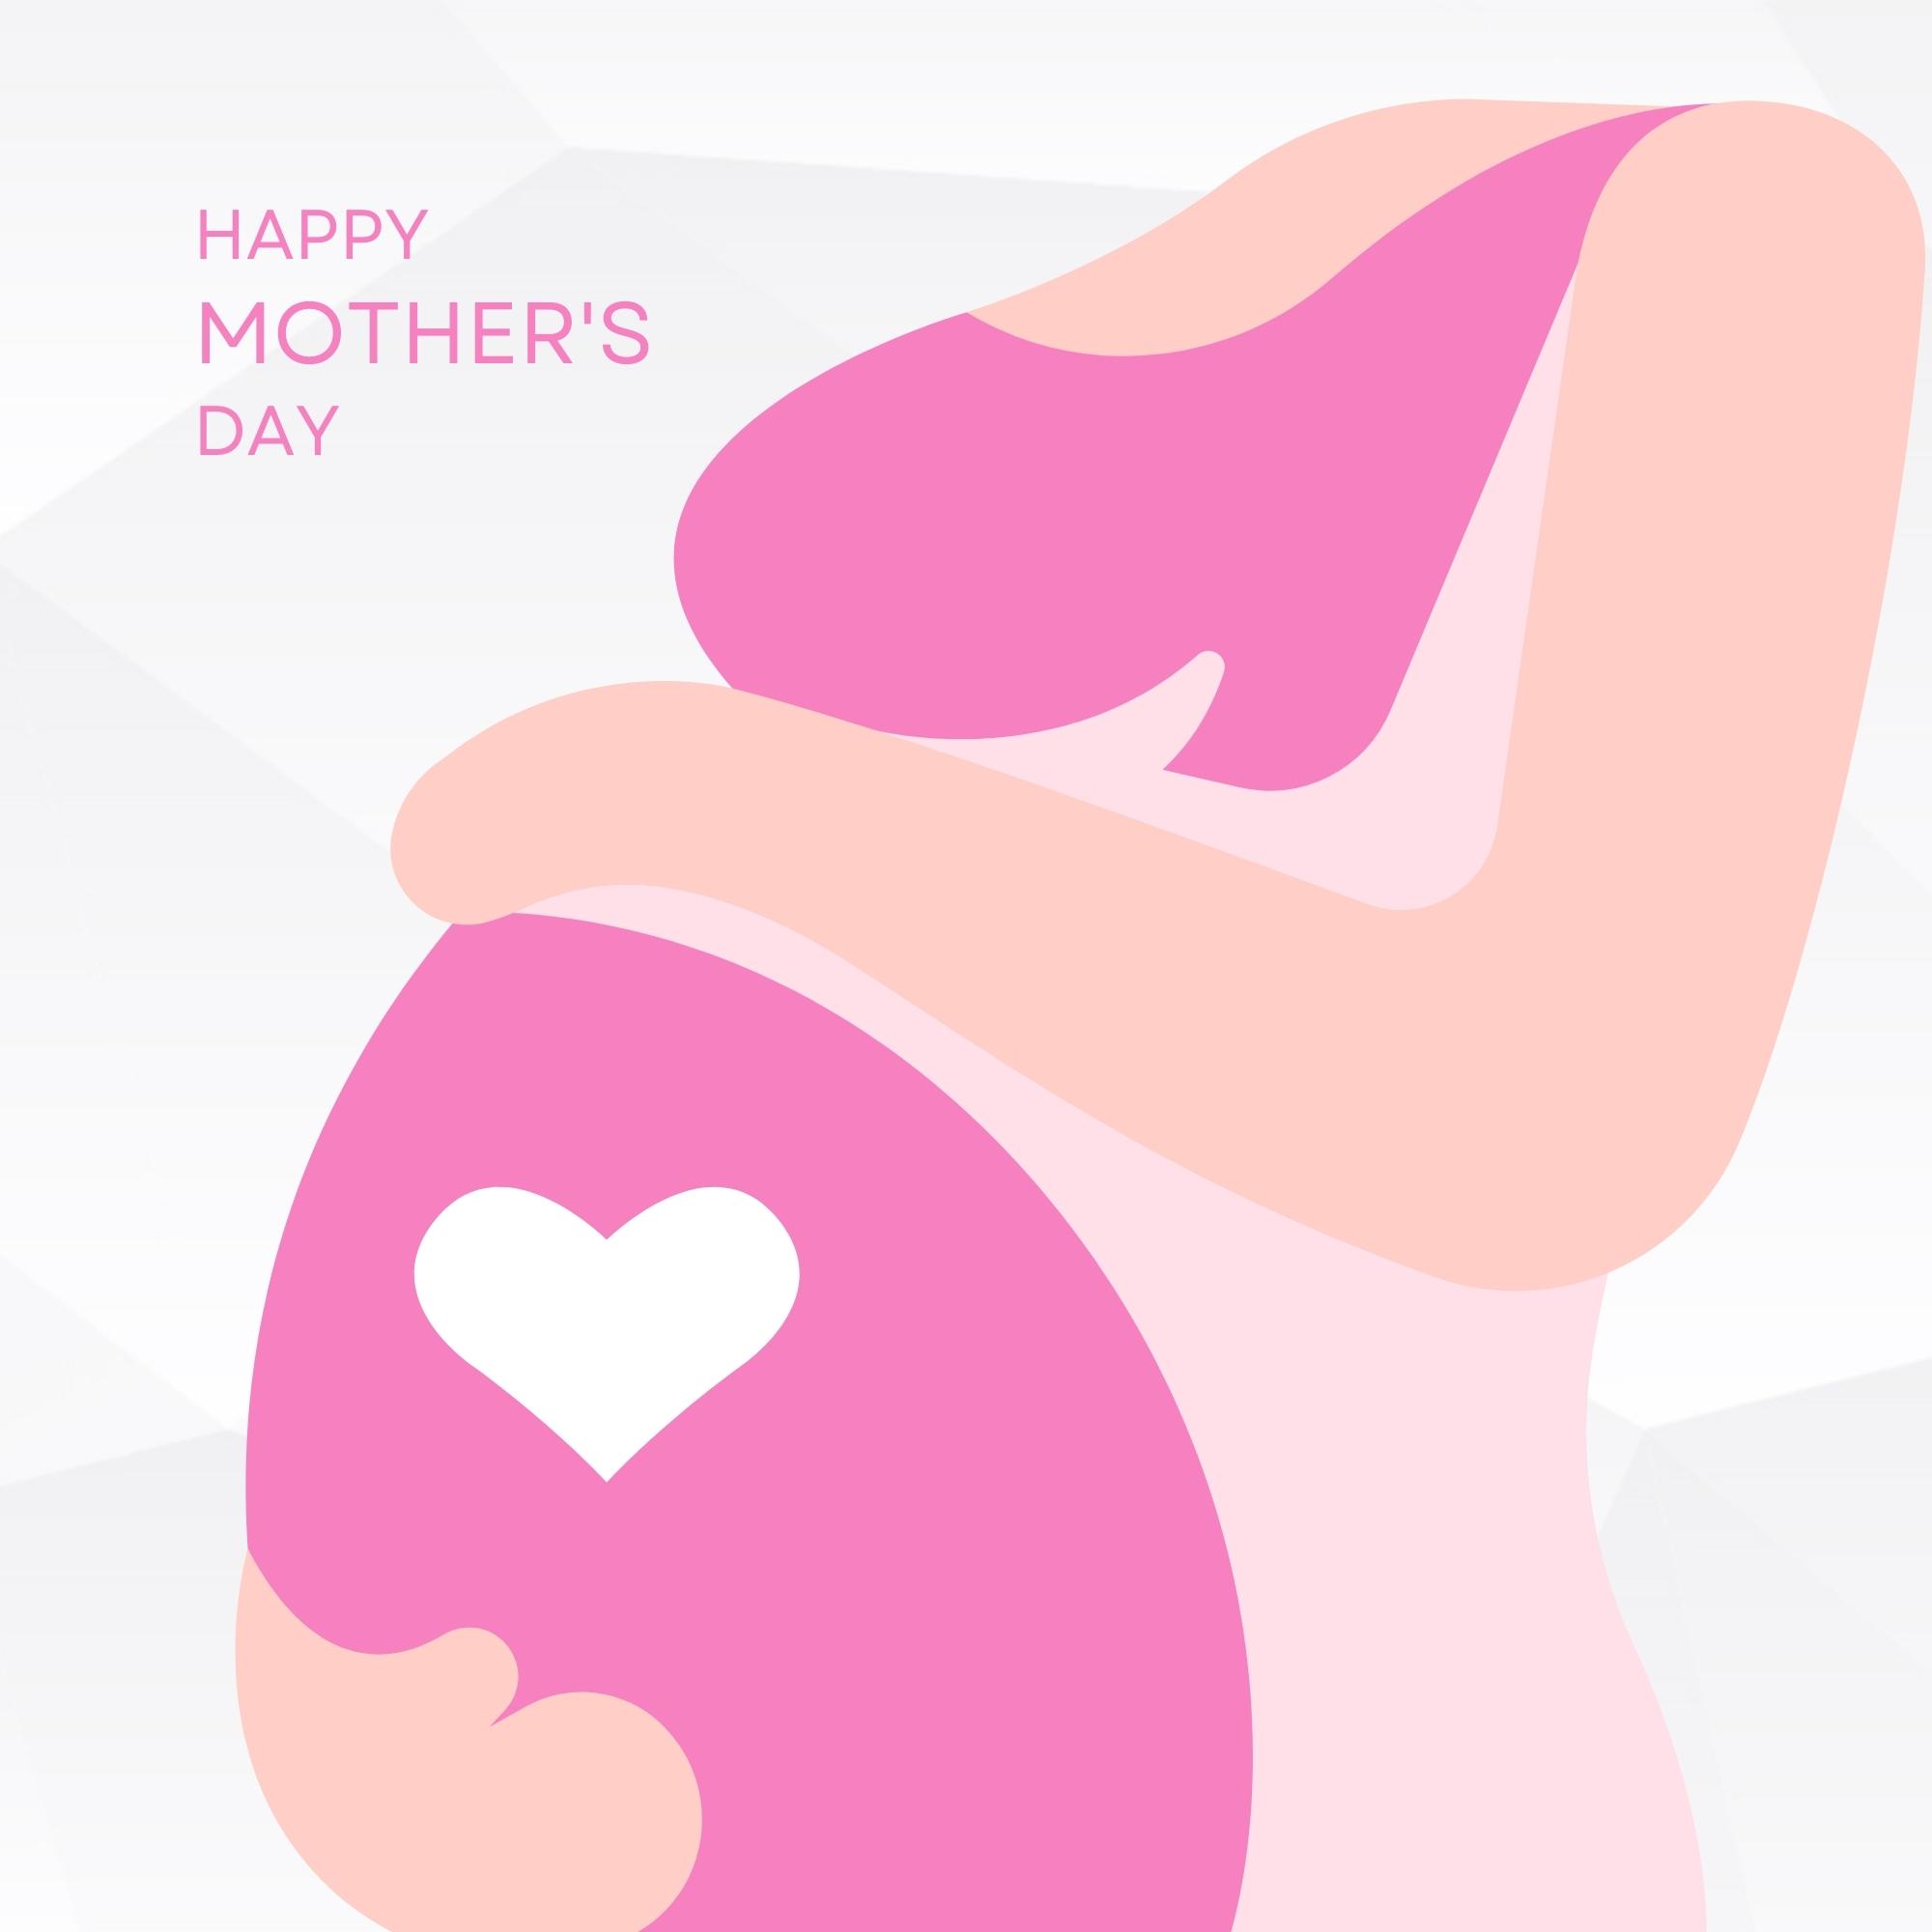 Happy Mothers Day Images | 1007 | Free Download [8k,4k,Hd]